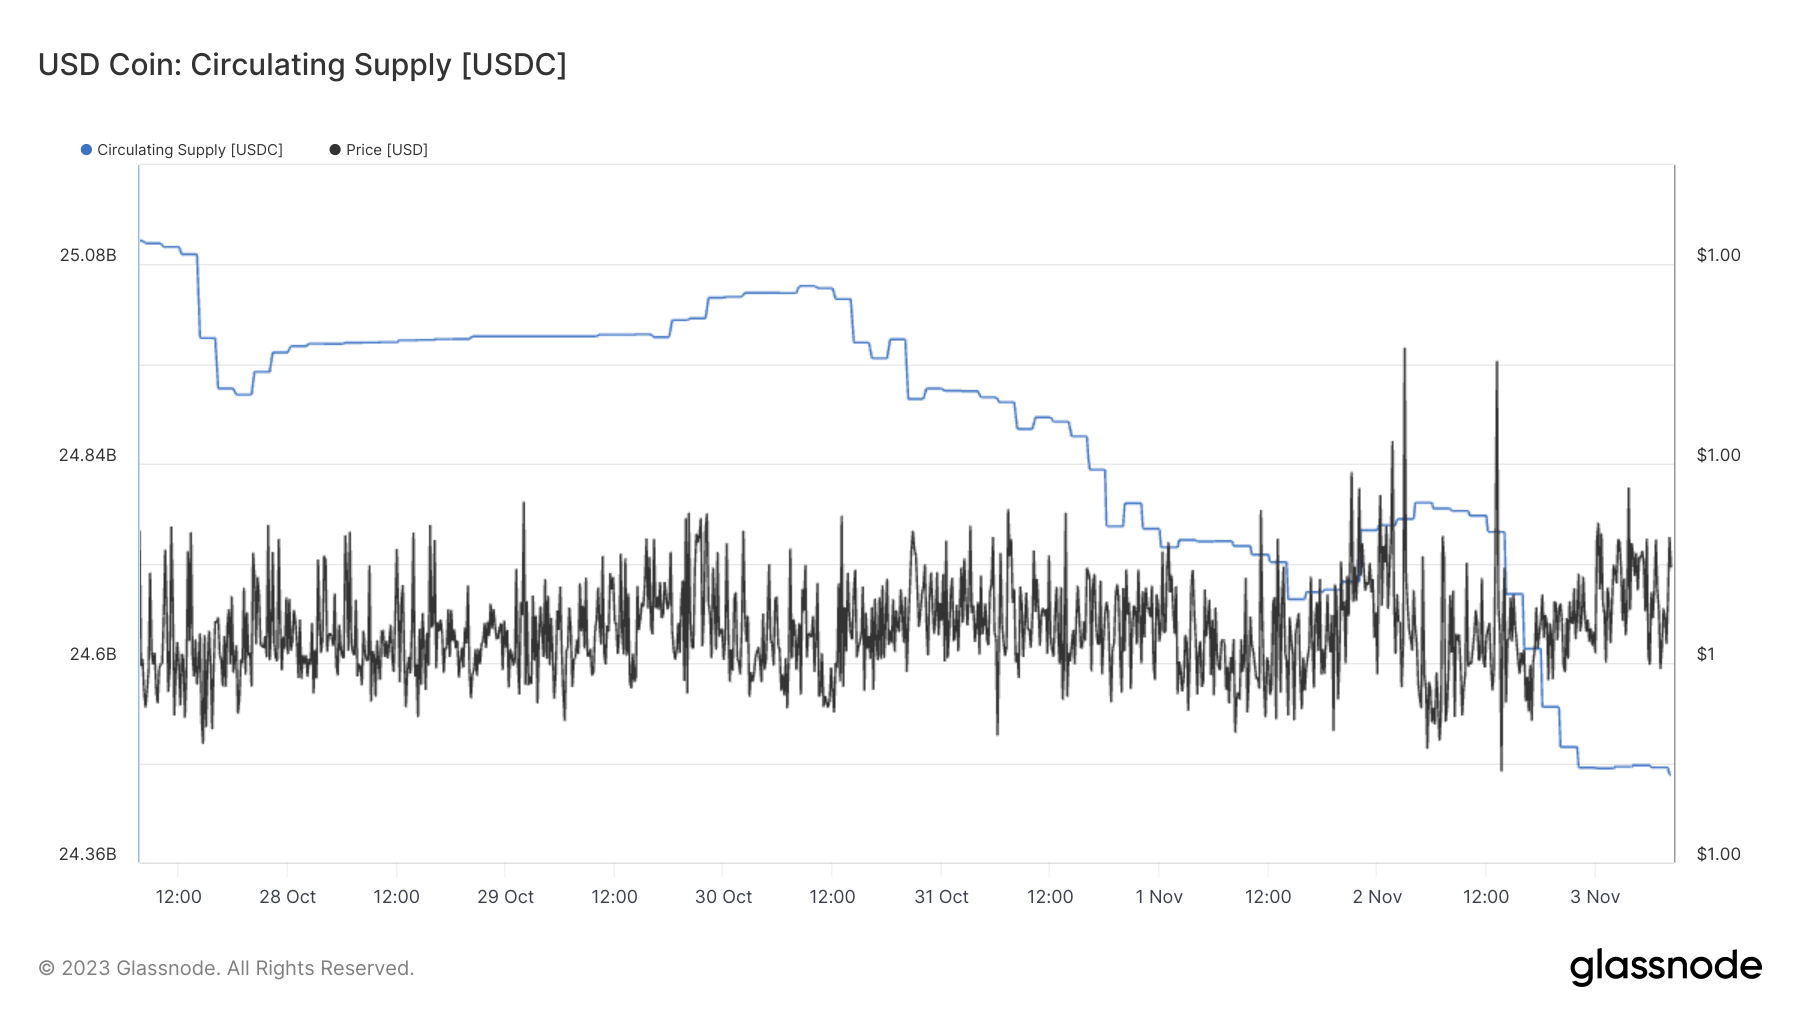 USDC circulation decreases by a further 300 Million in 24 hours